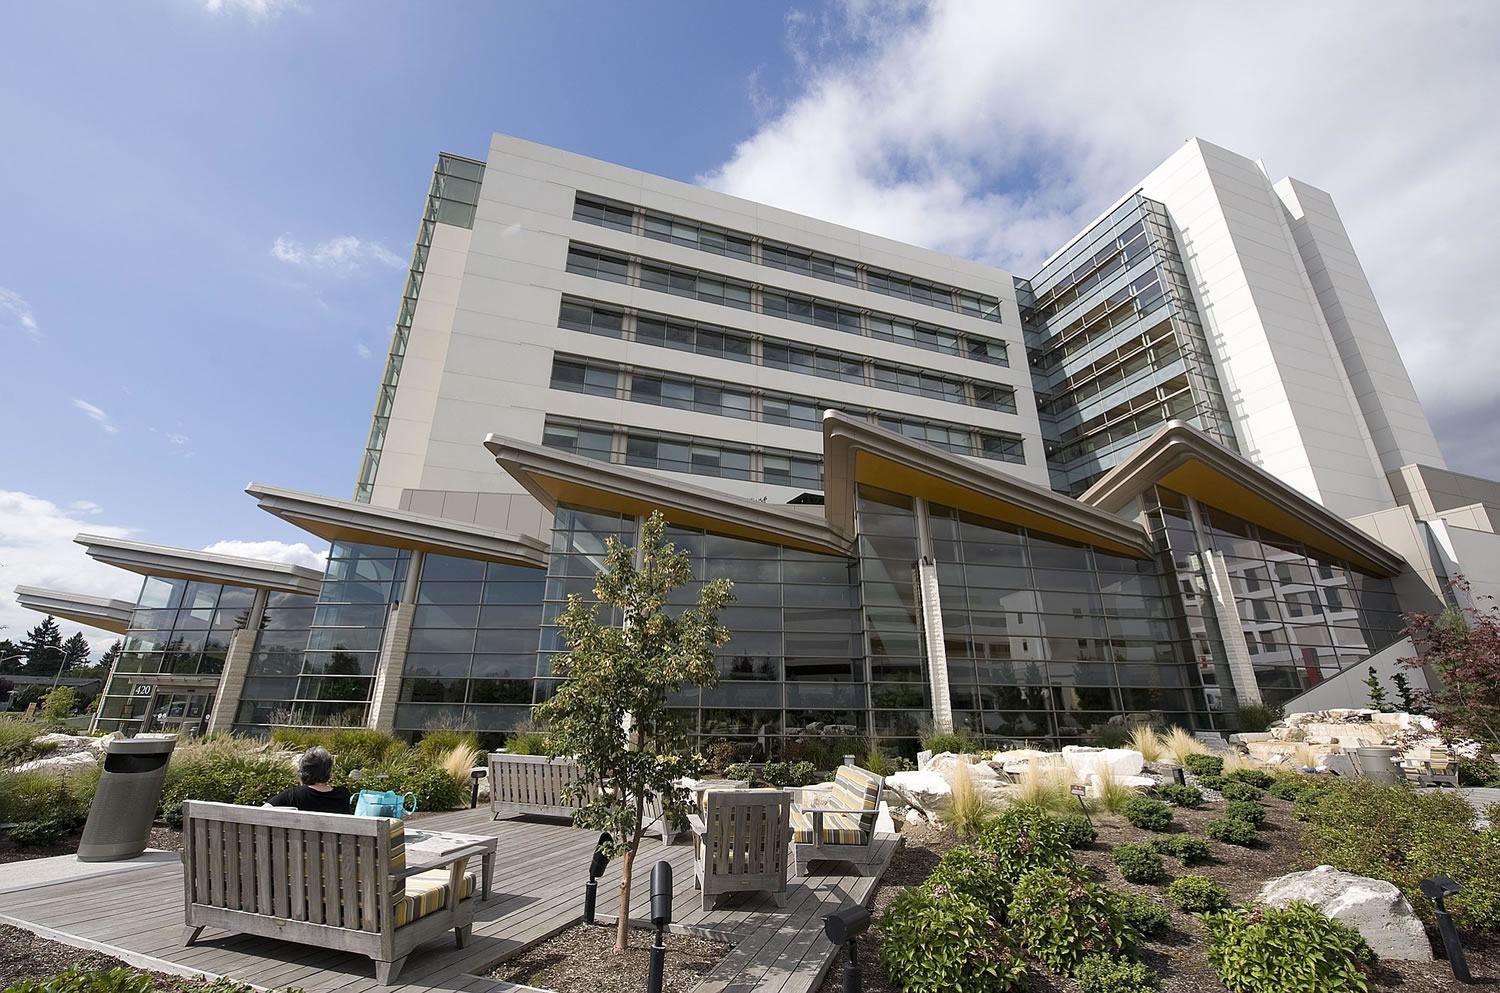 In December 2010, PeaceHealth became the new corporate parent of Vancouver-based Southwest Washington Medical Center, shown here.